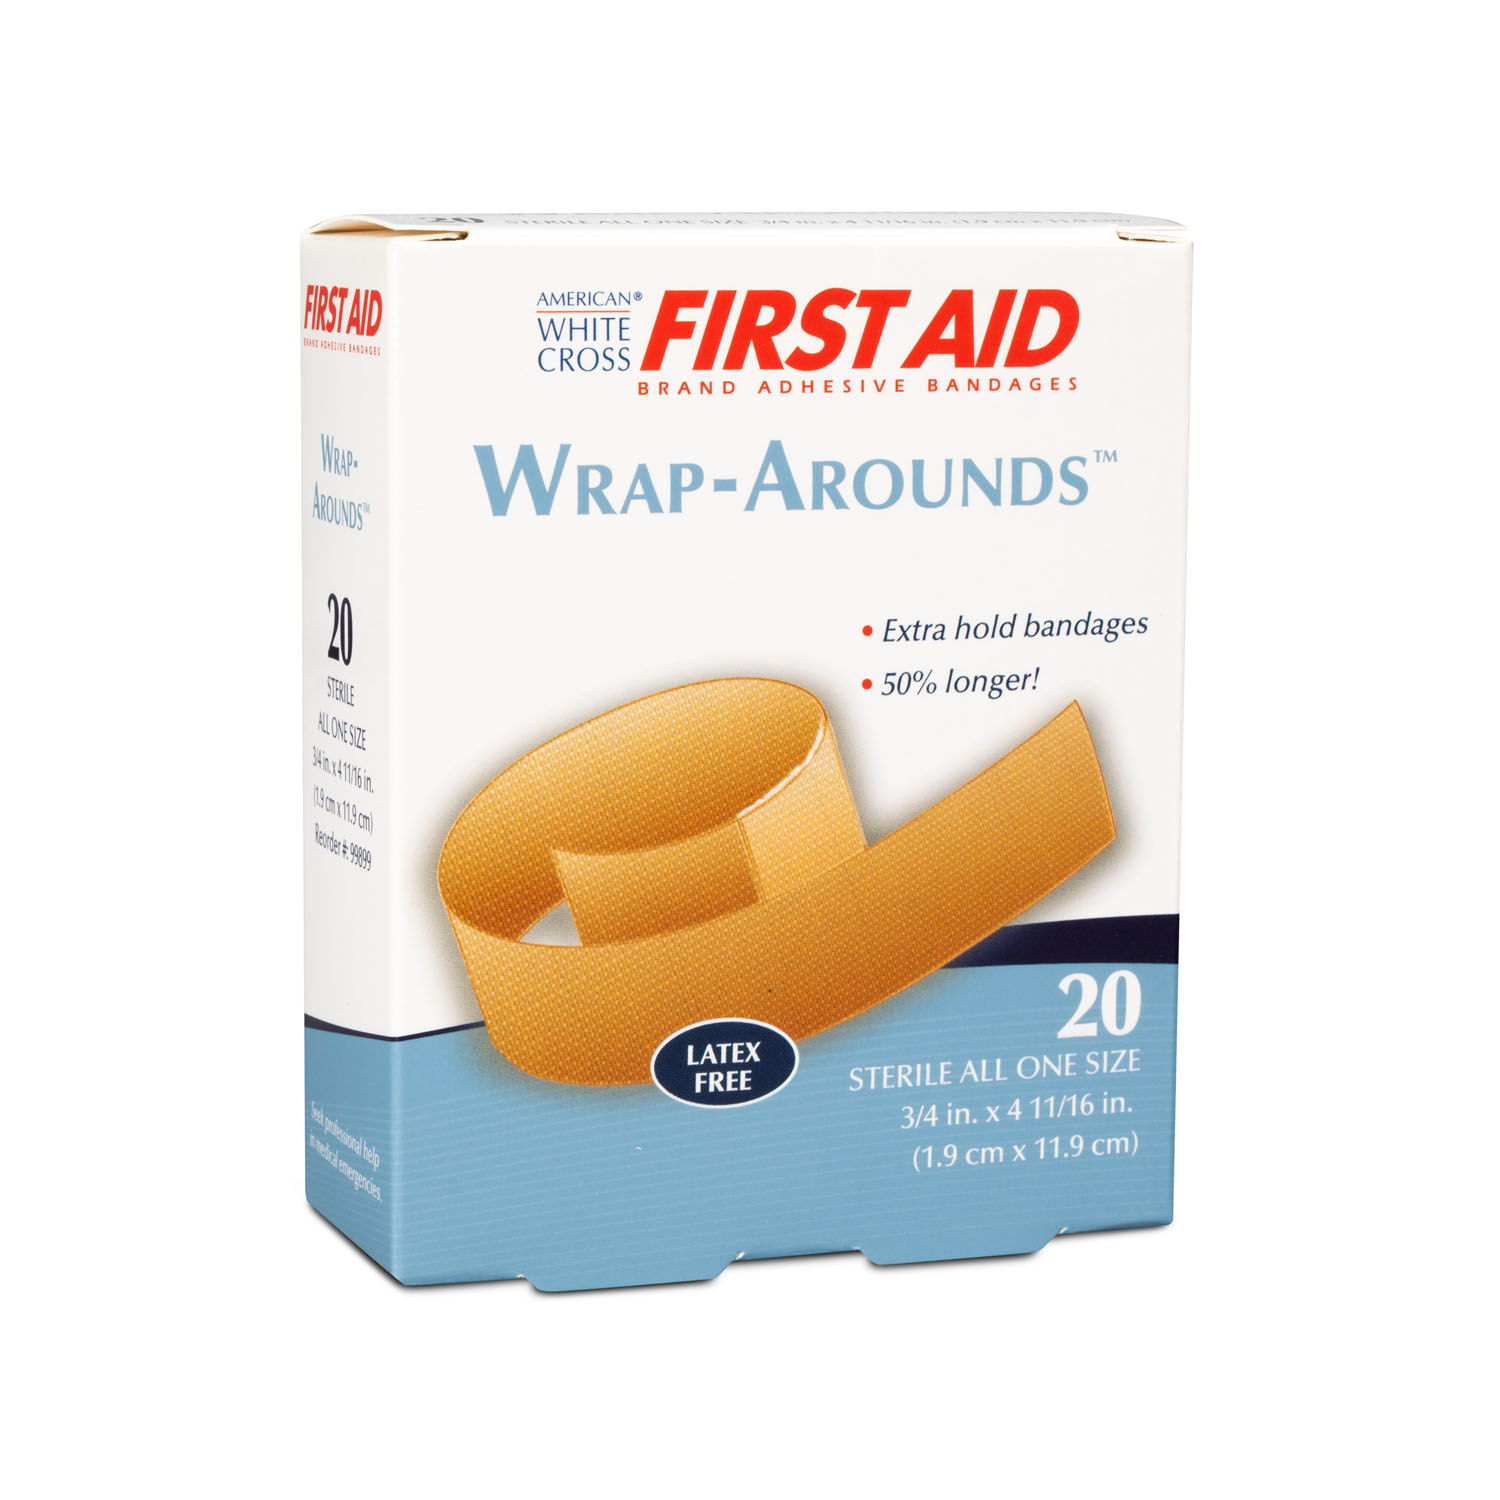 DUKAL FIRST AID ADHESIVE BANDAGES : 99899 BX $1.77 Stocked